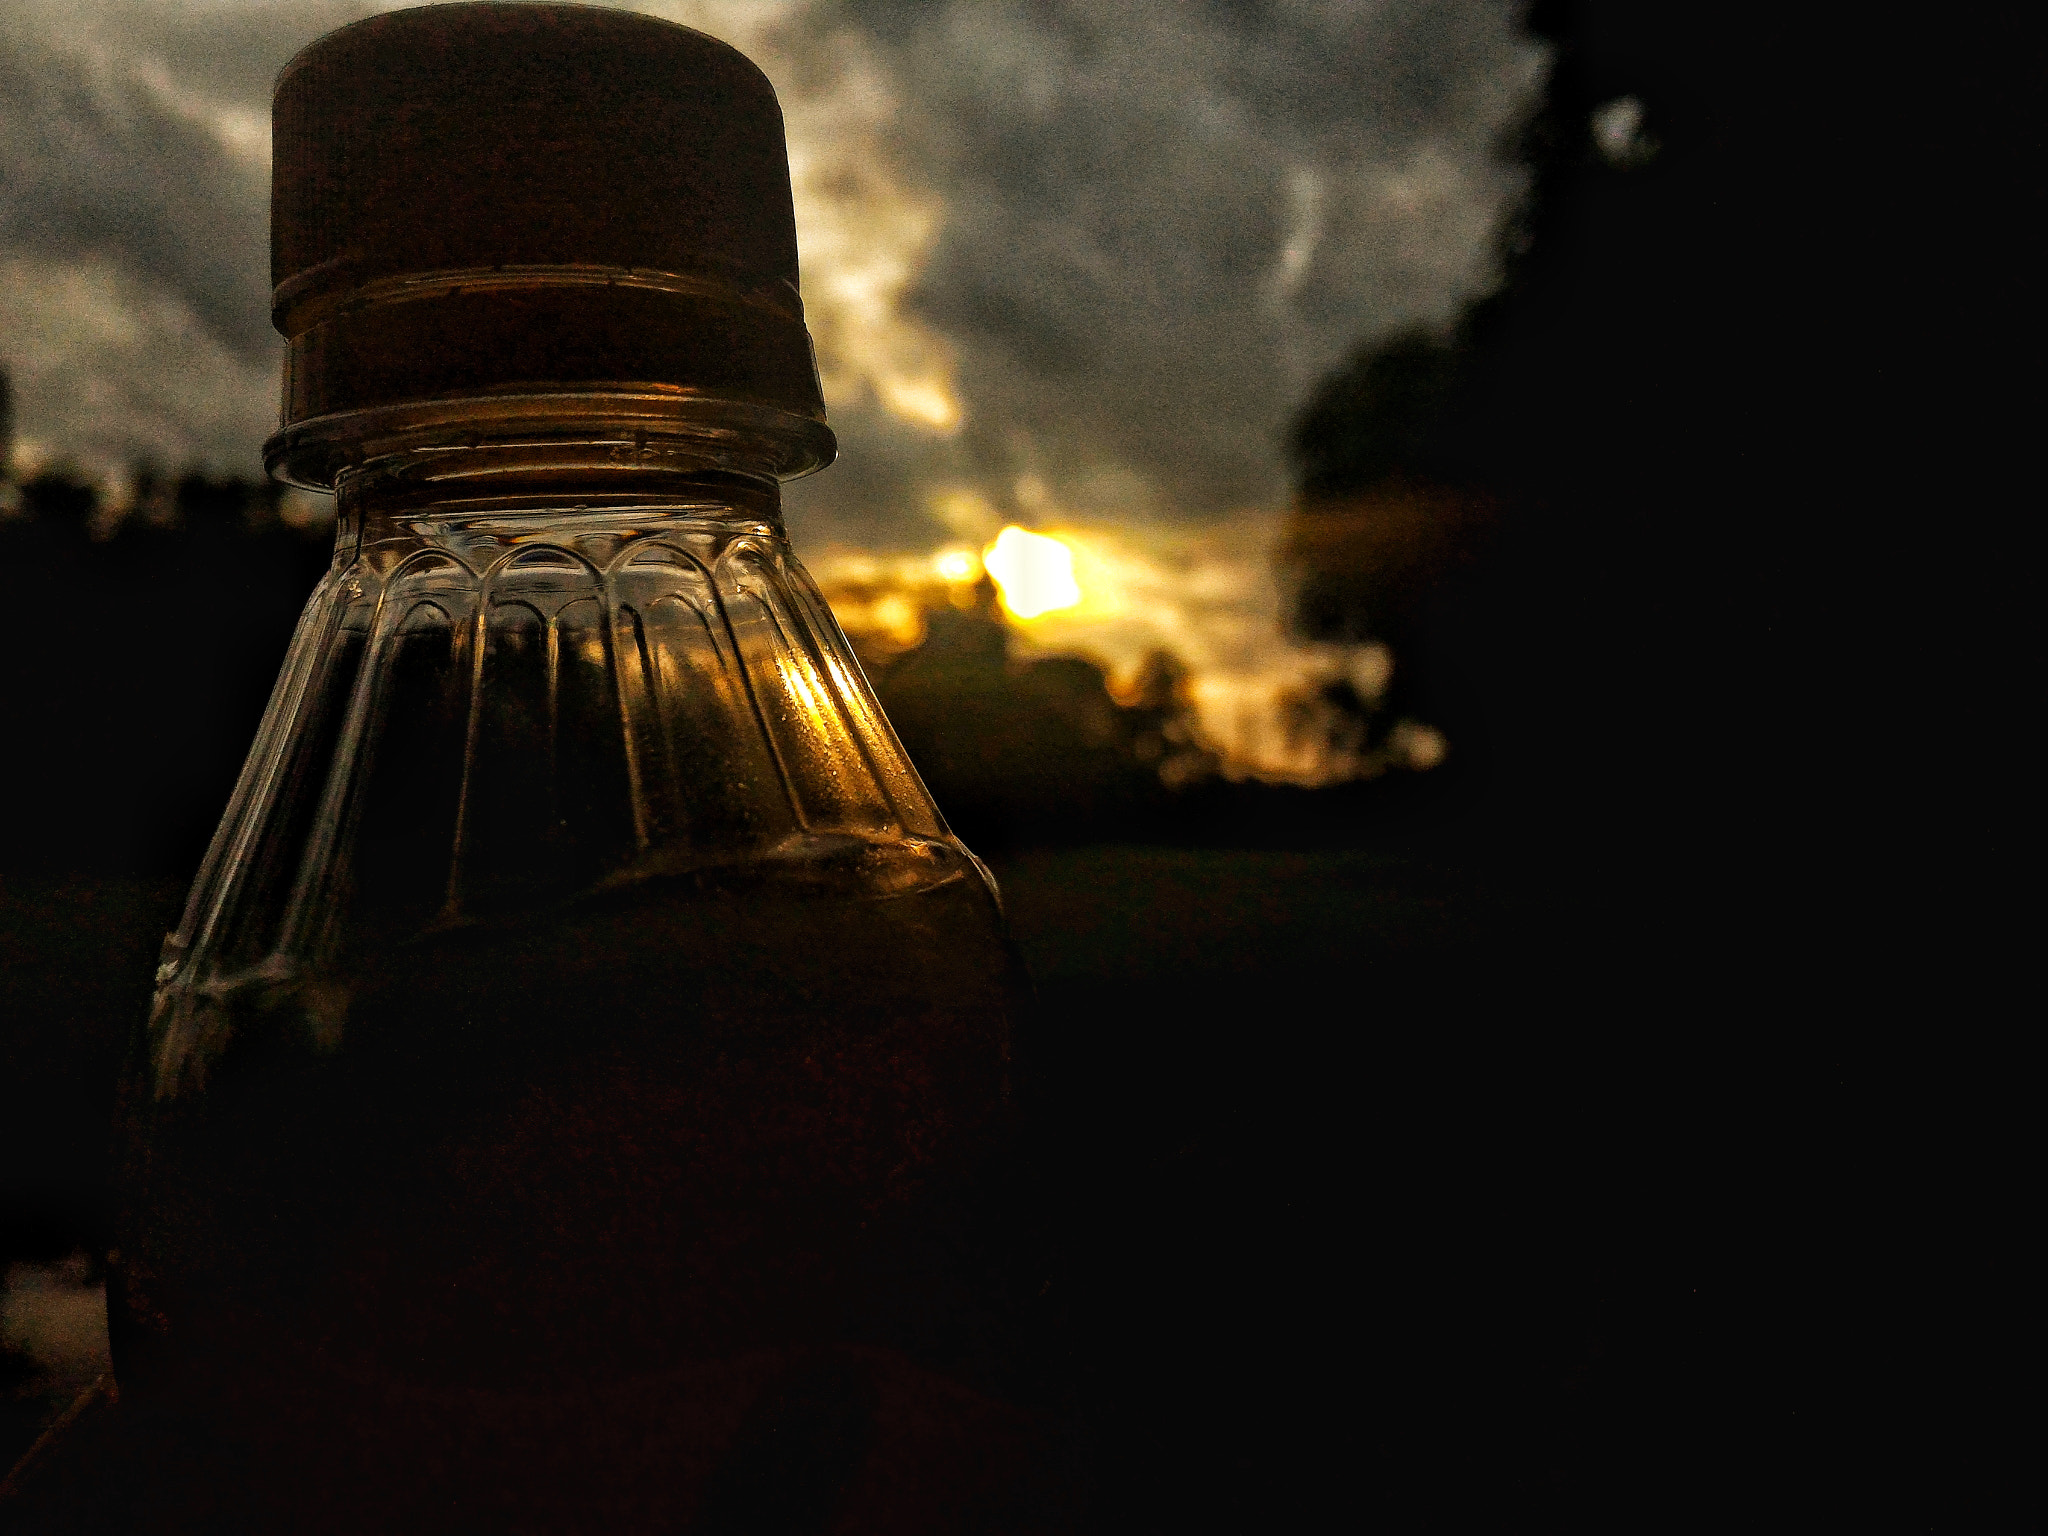 ASUS Z008D sample photo. Bottle of sunset photography